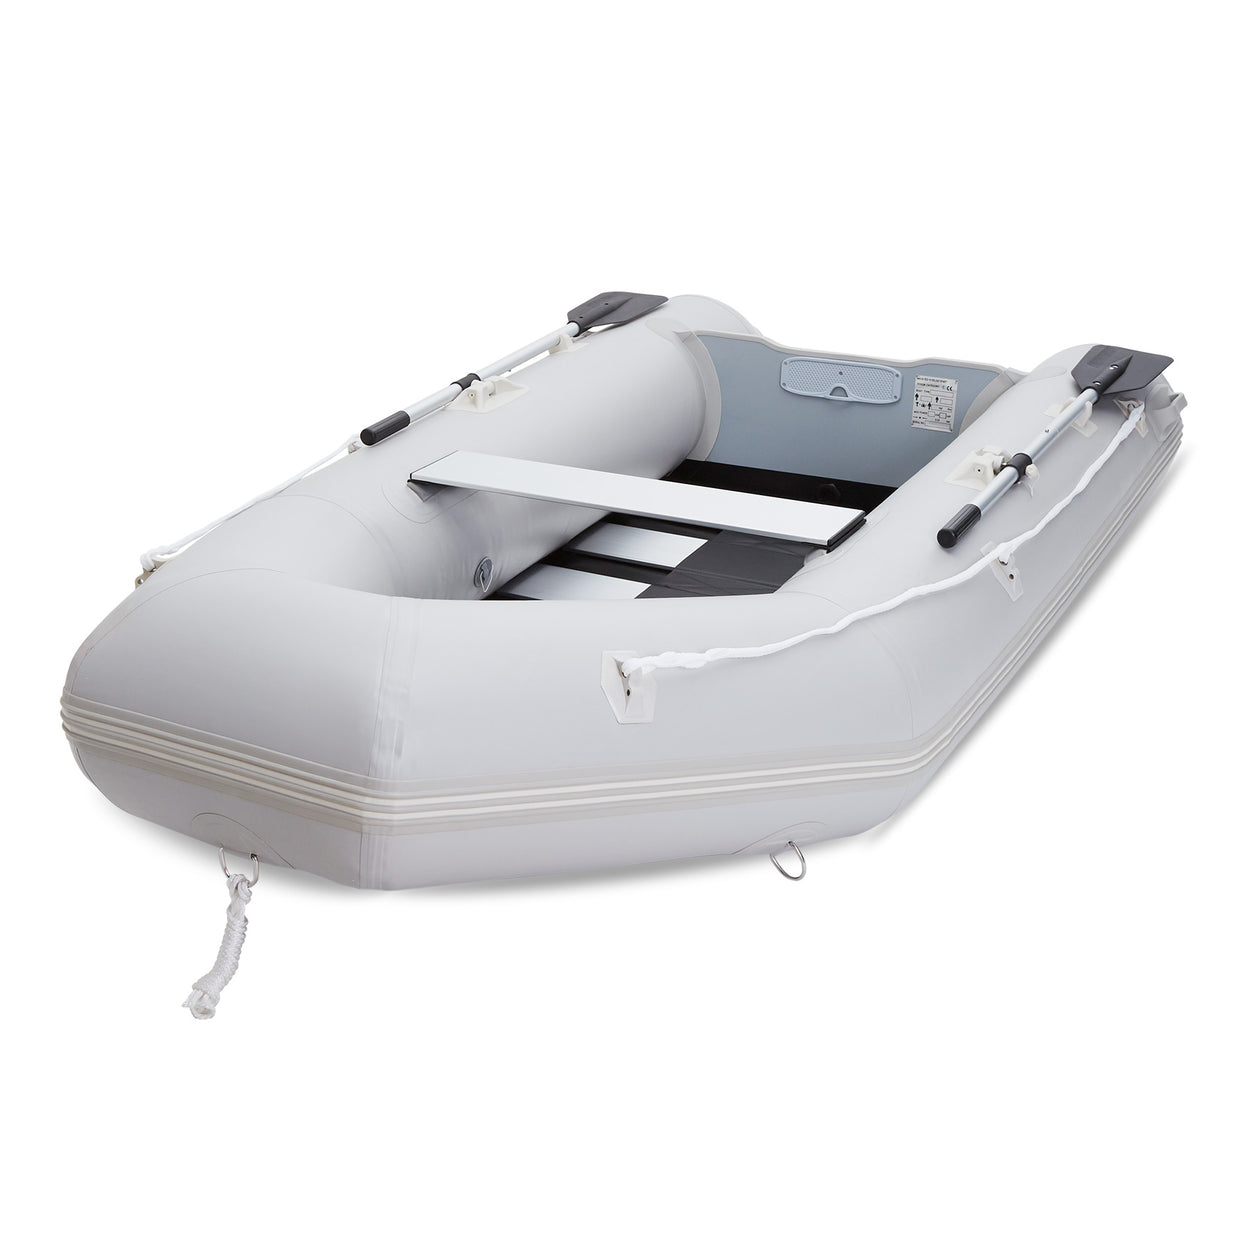 CO-Z 10 ft Inflatable Dinghy Boats with Aluminium Alloy Floor, 4 Perso